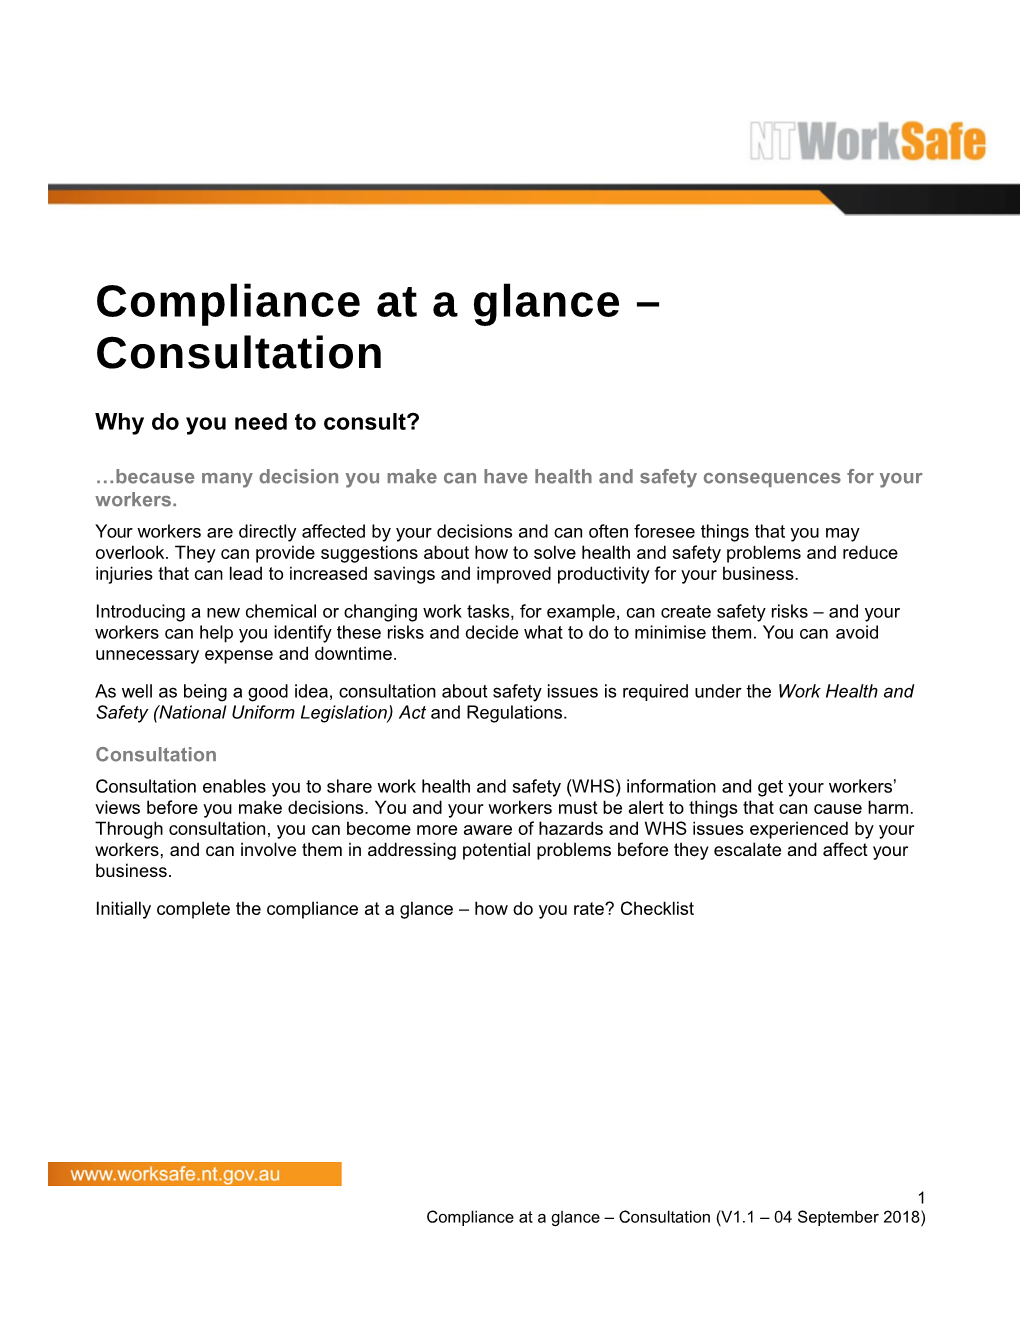 Compliance at a Glance Consultation